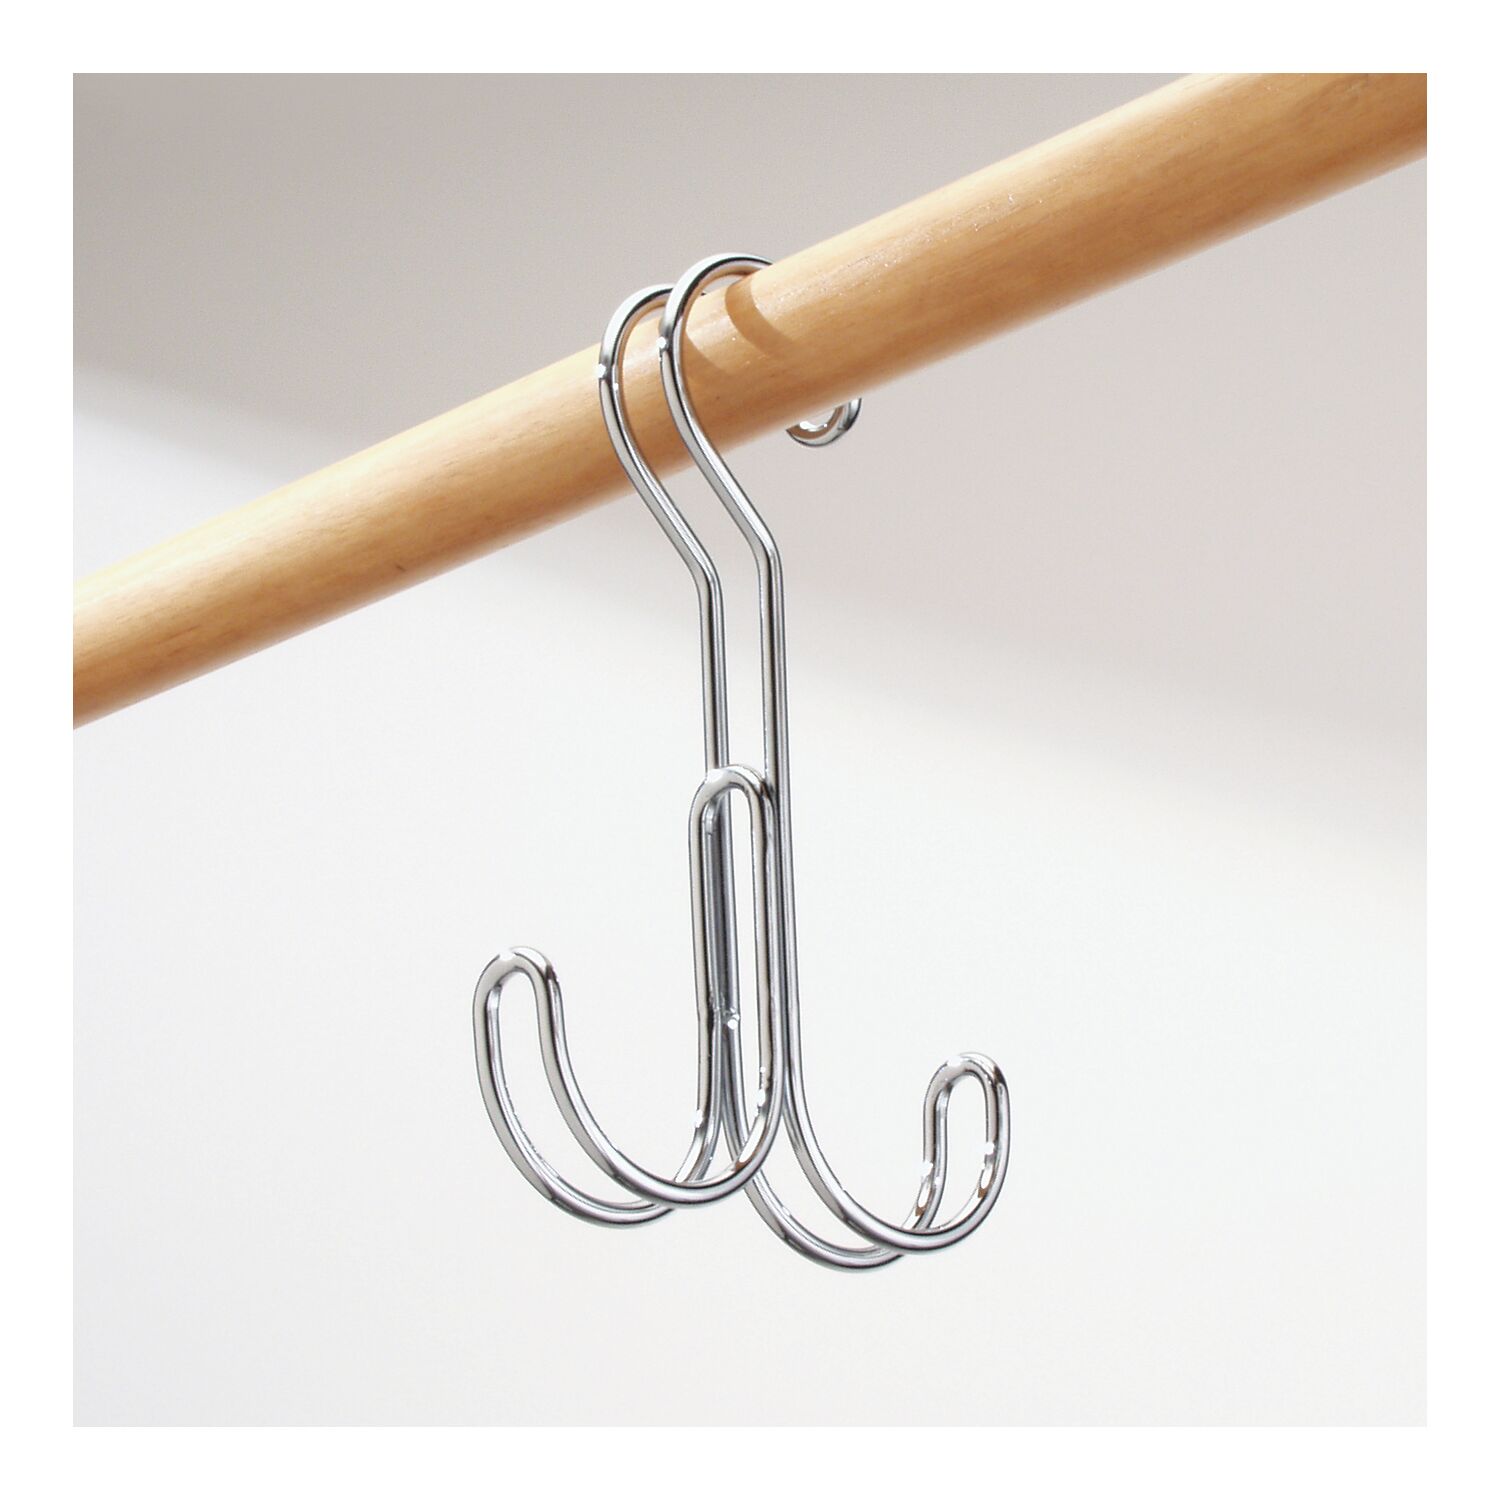 iDesign Classico MEtal over-the-Rod Hook with 2 Brackets, 3.8" x 6", Chrome - image 2 of 4